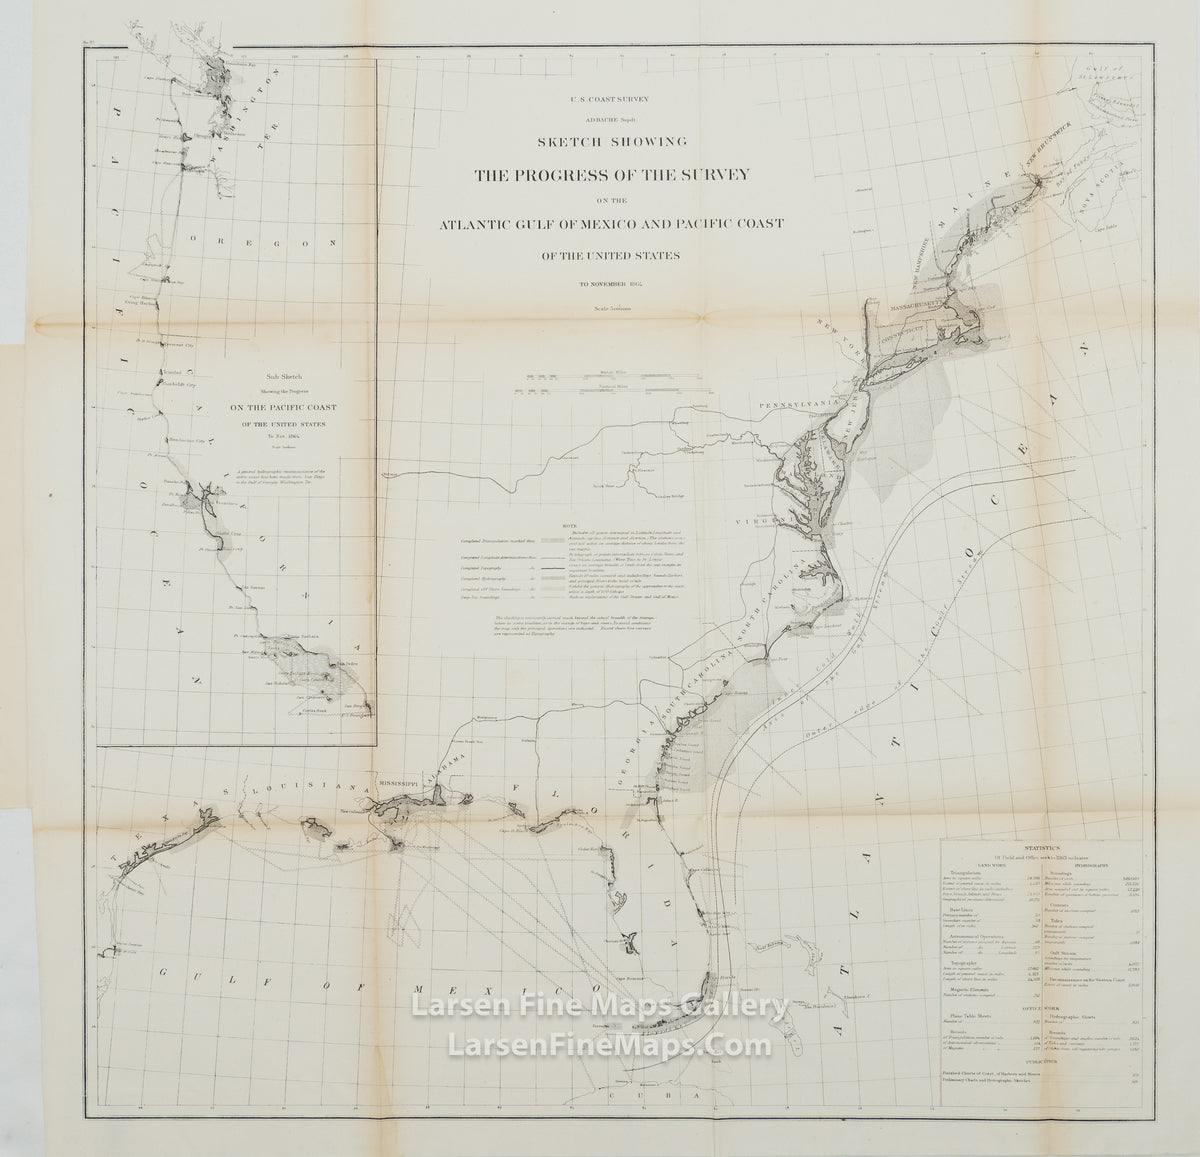 U.S. Coast Survey A.D. Bache Supdt. Sketch Showing the Progress of The Survey on the Atlantic Gulf of Mexico and Pacific Coast of The United States, To November 1864